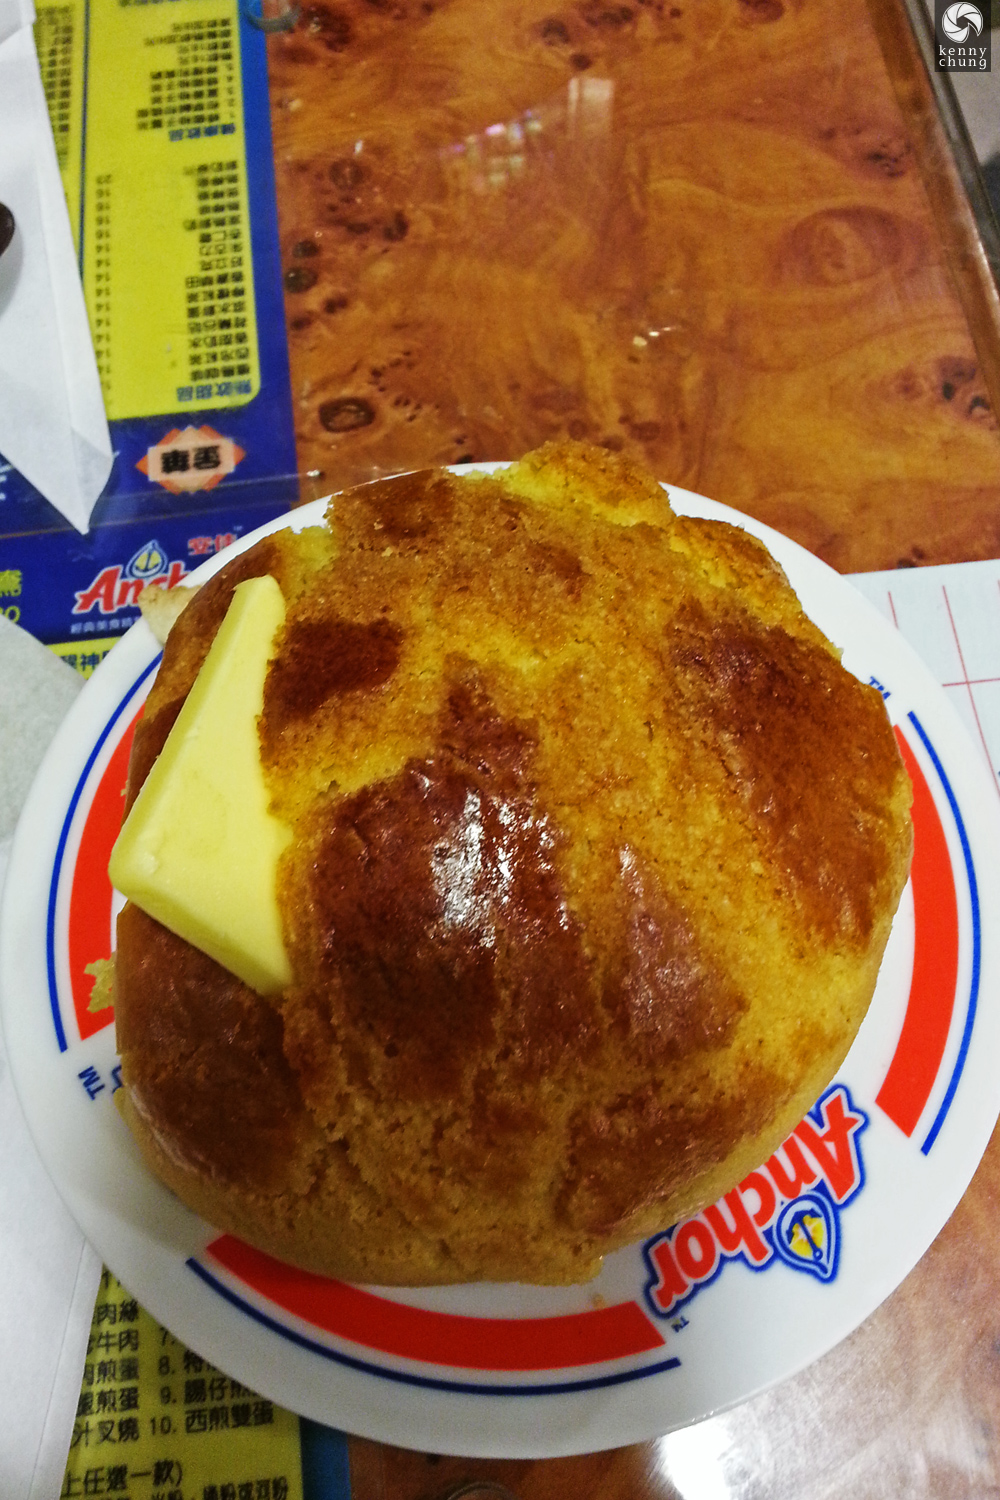 Pineapple bun with butter at Kam Wah Cafe in Kowloon, Hong Kong